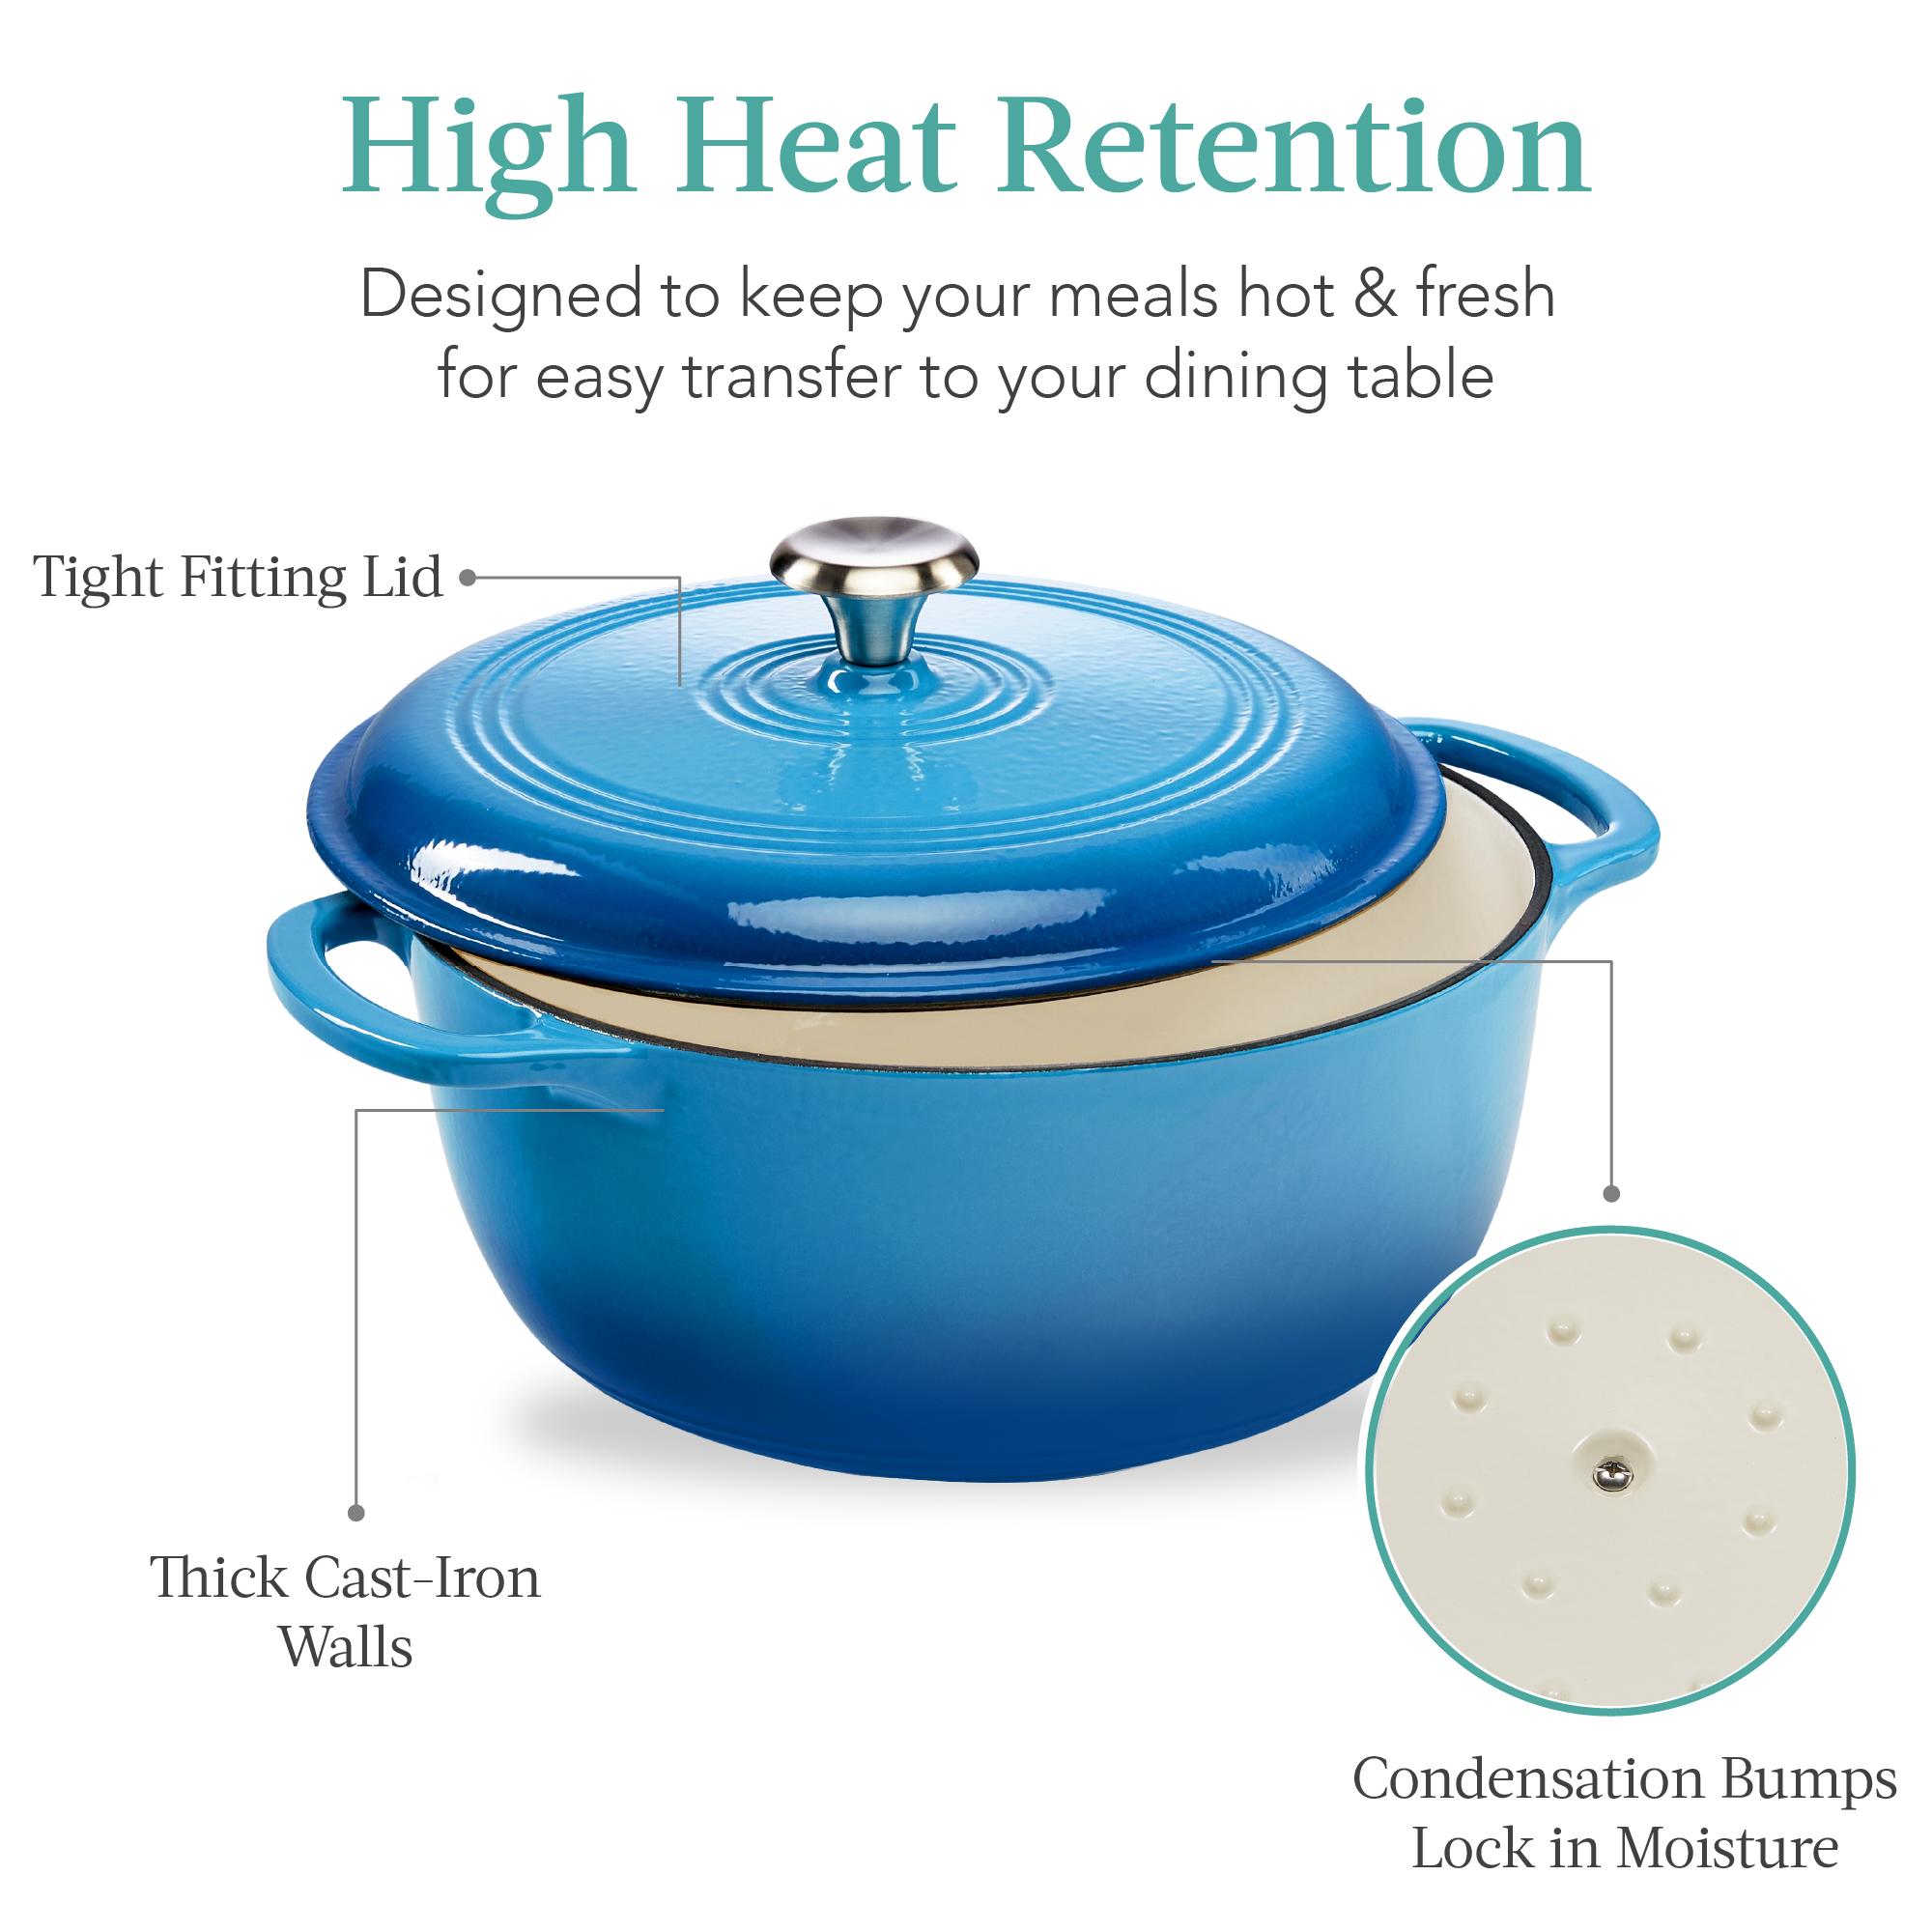 Best Choice Products 6 Quart Cast-Iron Dutch Oven, Heavy-Duty Kitchenware w/ Enamel, Side Handles - Blue - image 5 of 7